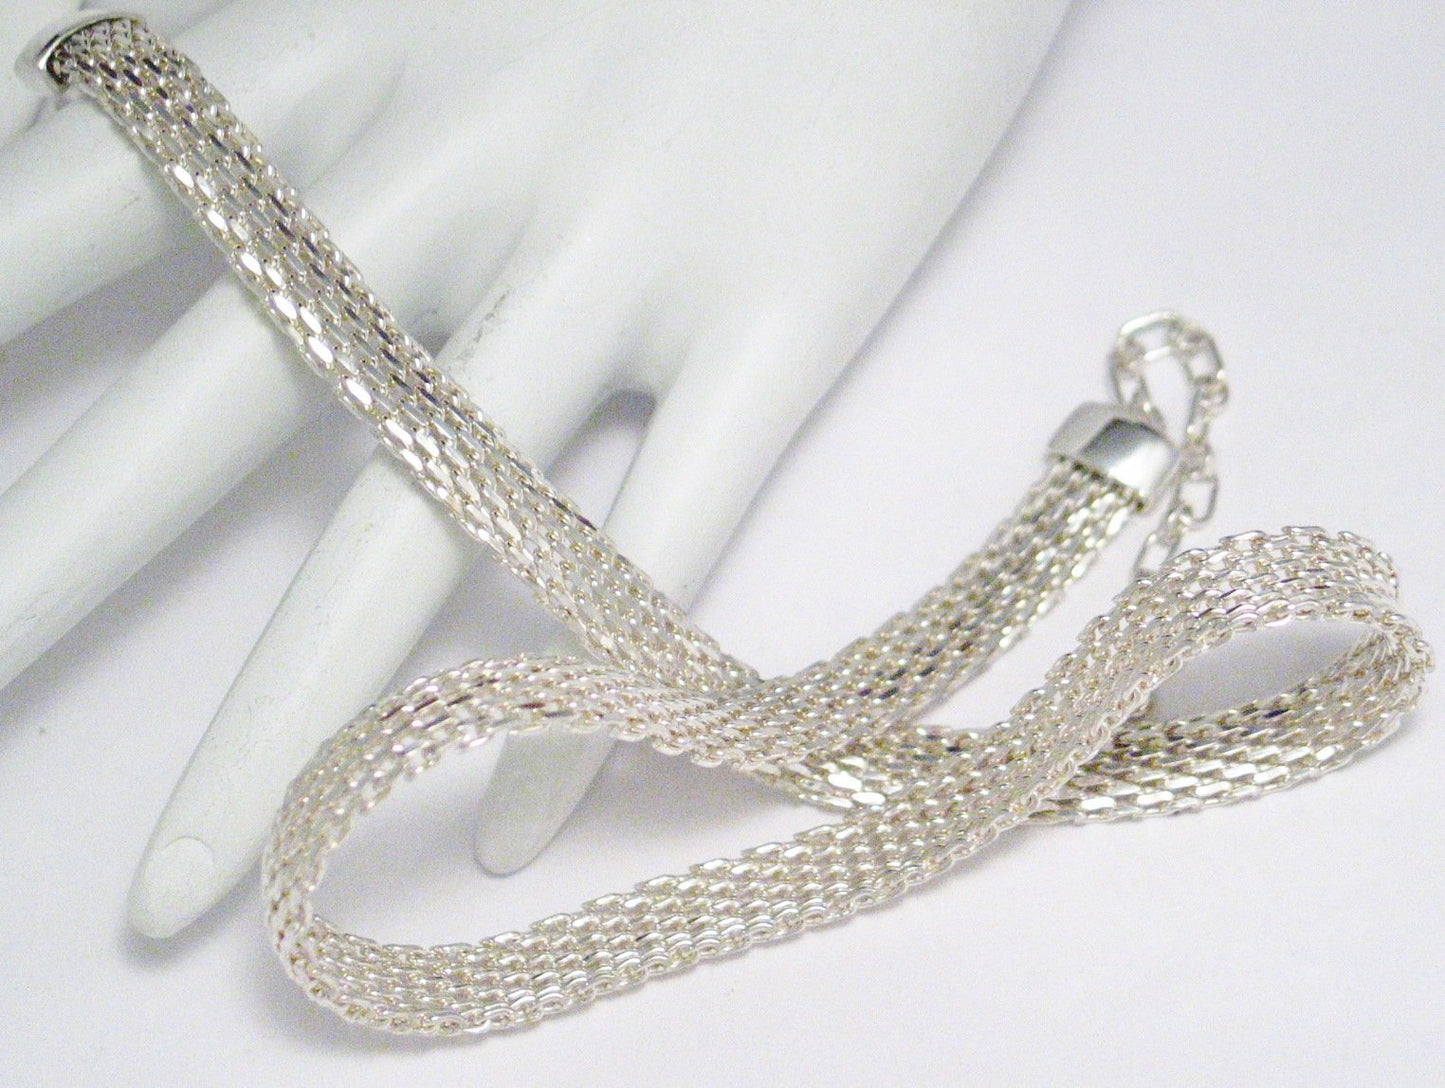 Chain | Sterling Silver Woven Mesh Bismarck Chain Necklace 16.25-18.25" | Discount Estate Jewelry online at Blingschlingers Jewelry